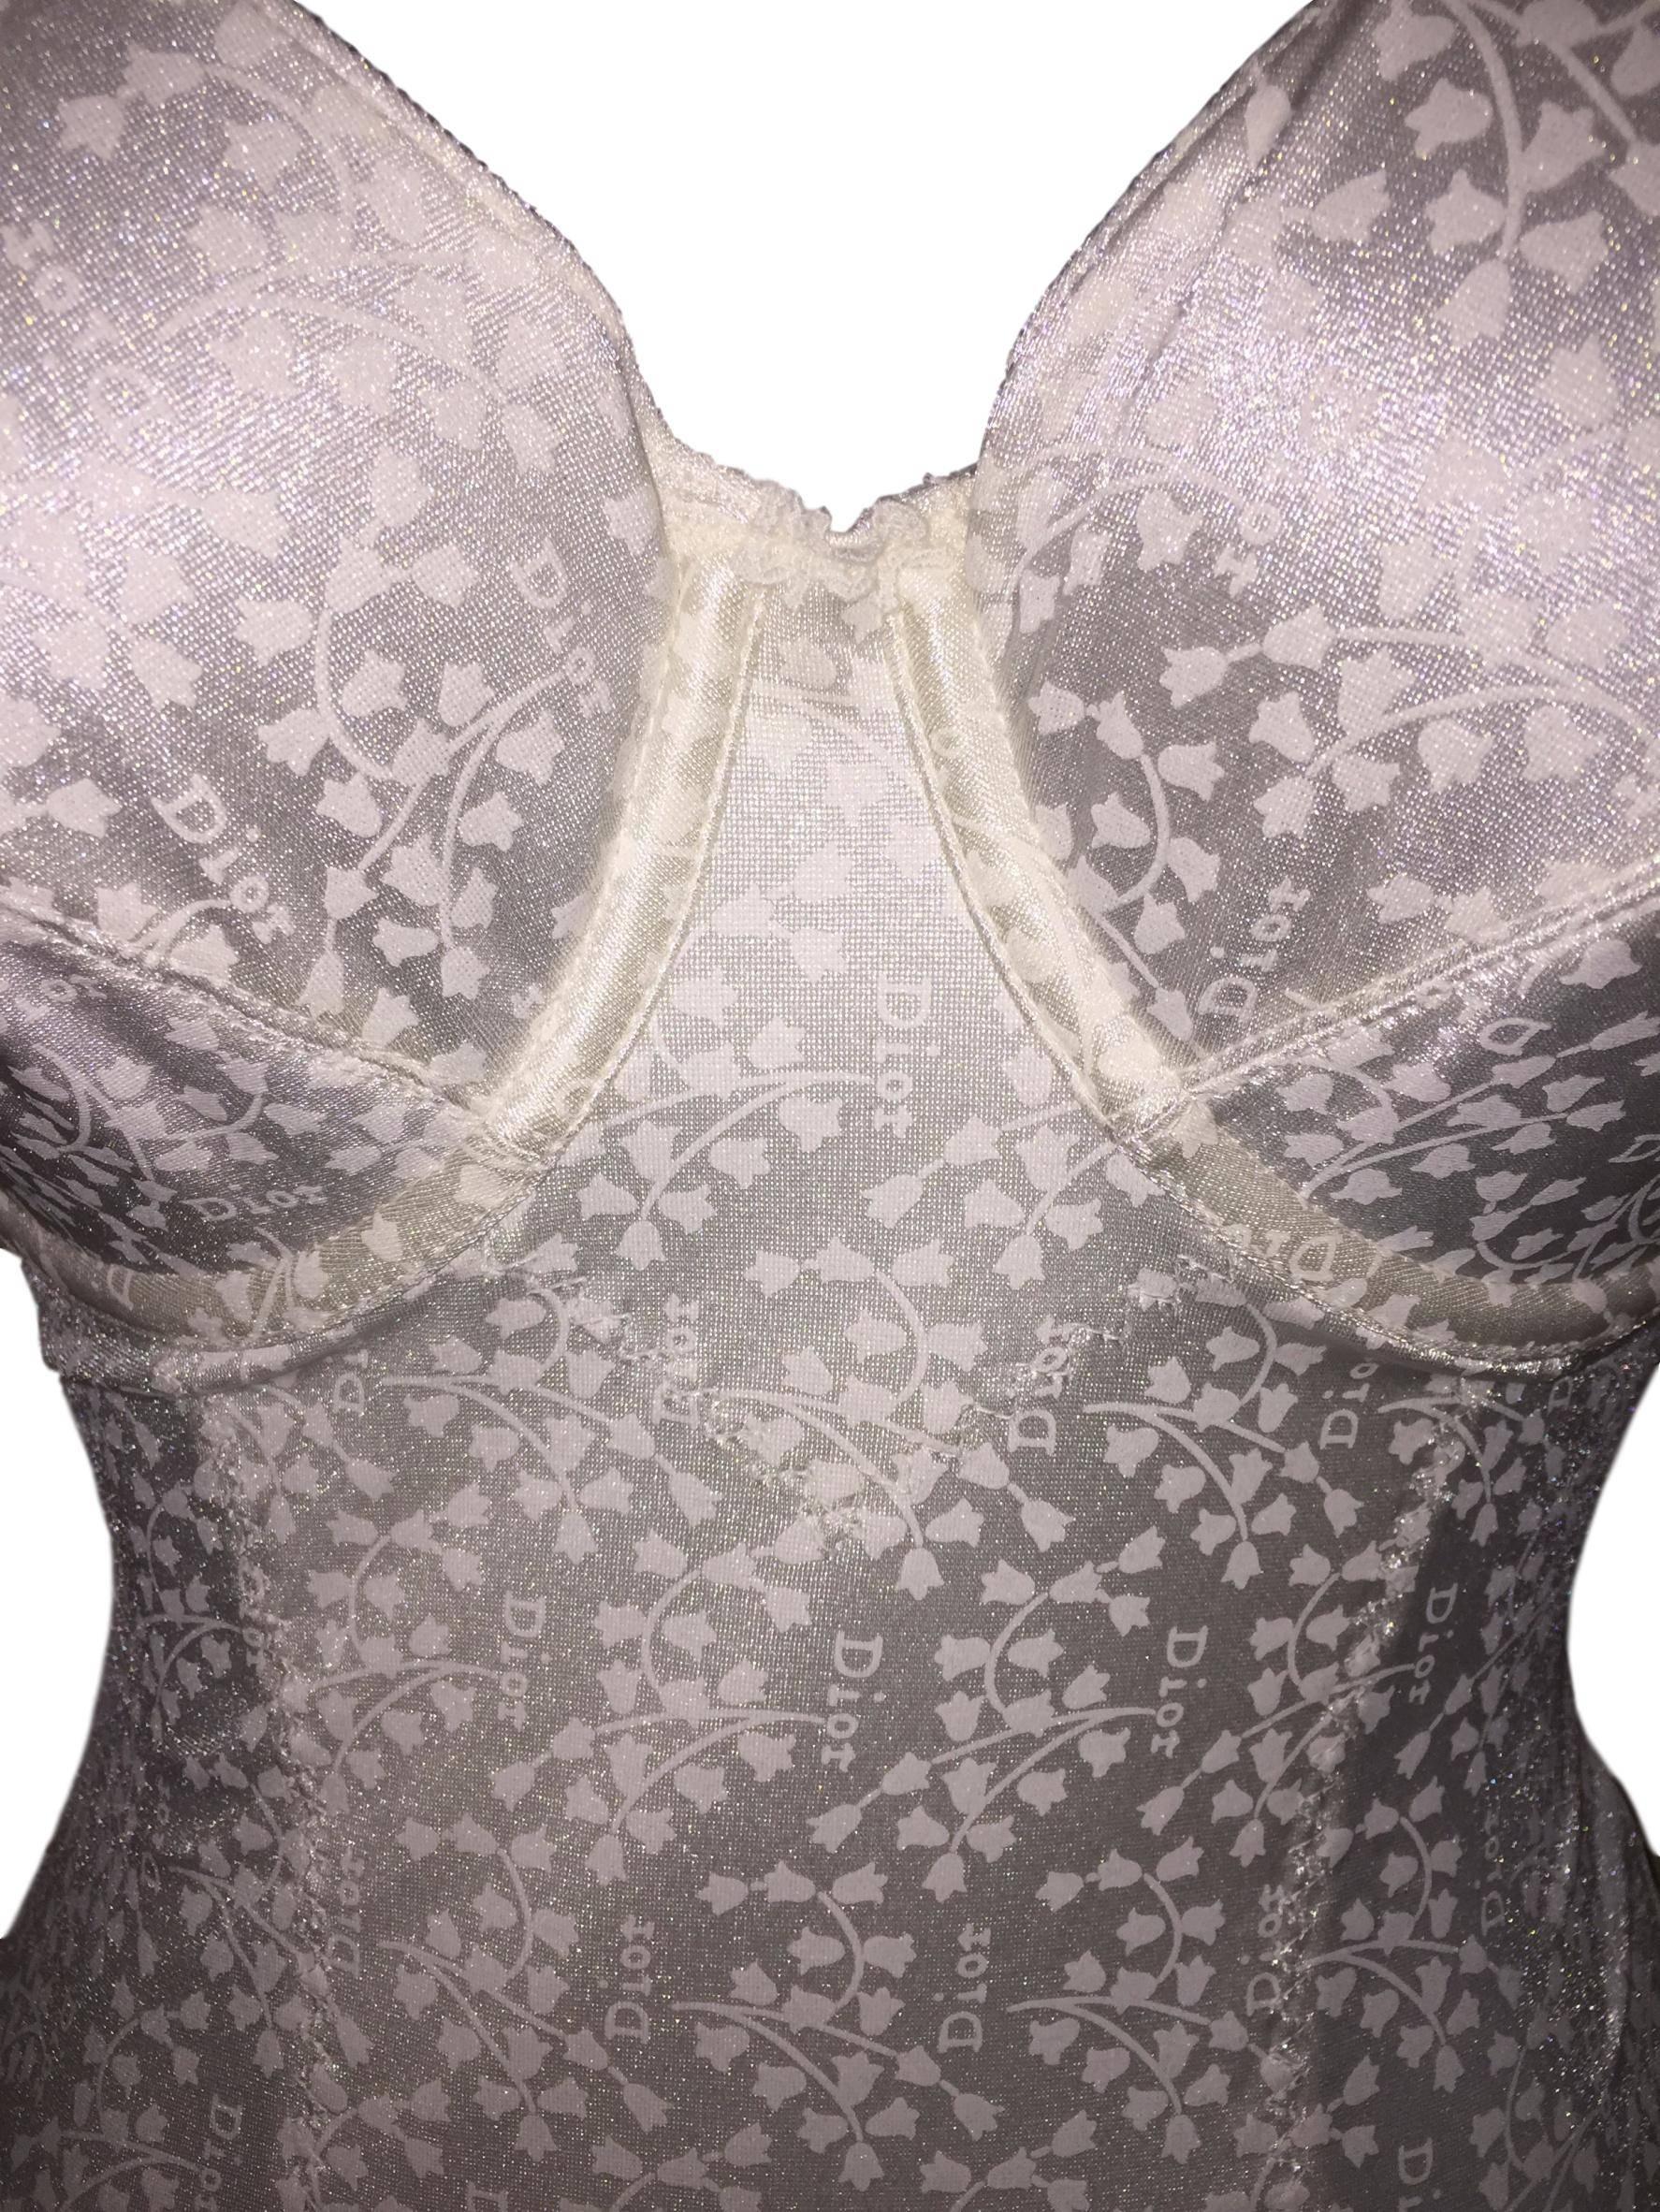 DESIGNER: 1990's Christian Dior

Please contact for more information and/or photos.

CONDITION: New with tags

MATERIAL: Nylon & Spandex

COUNTRY MADE: USA

SIZE: 36D- runs small with D cups, please review measurements

MEASUREMENTS; provided as a